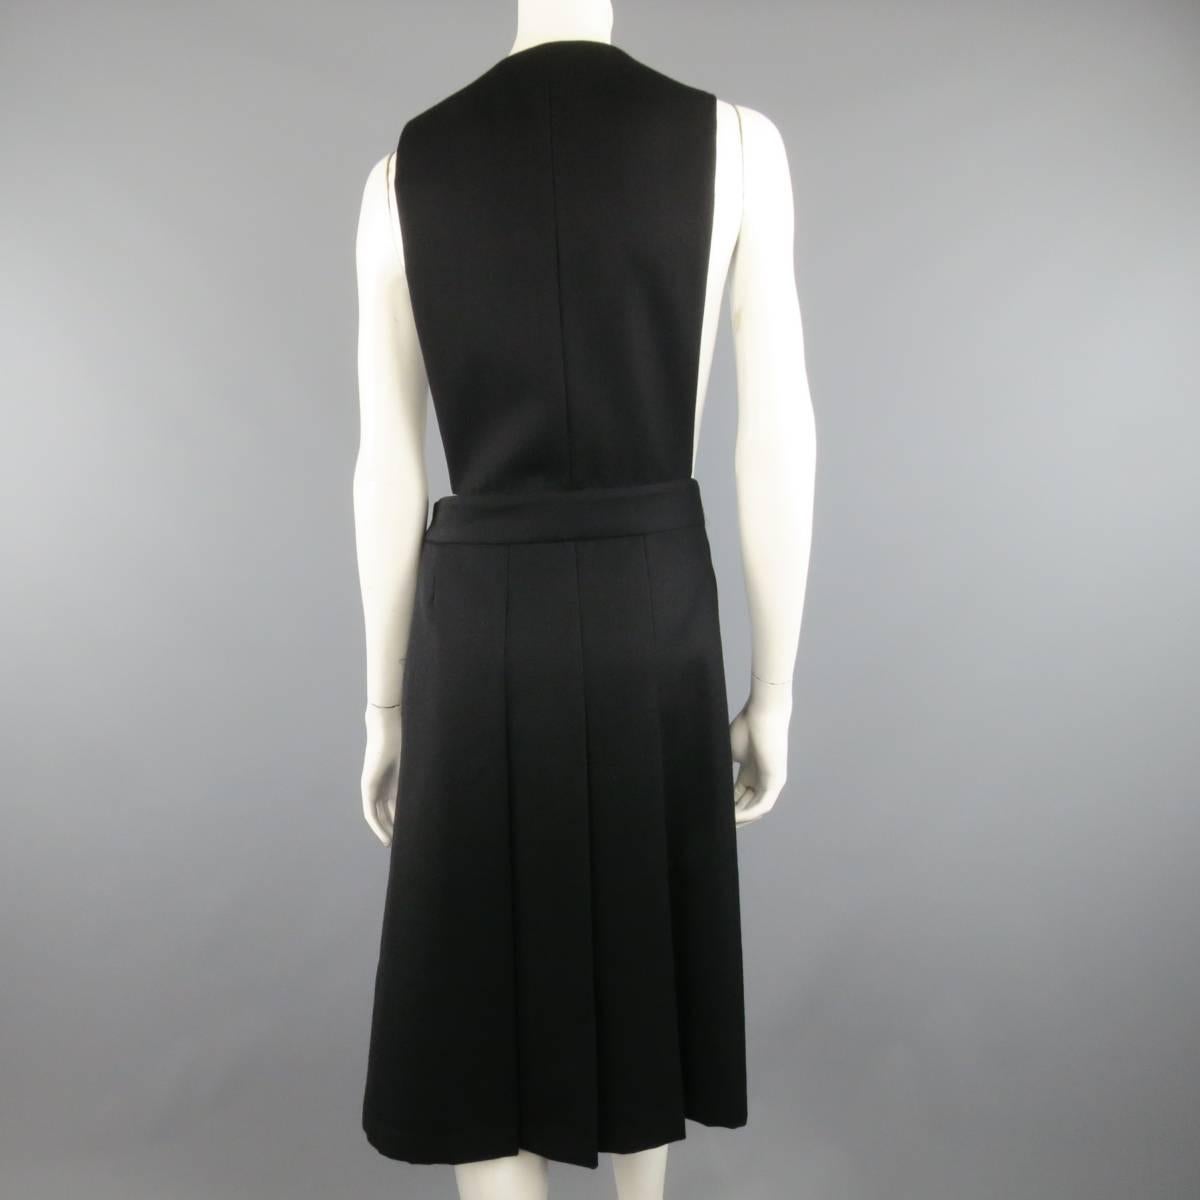 Comme des Garcons Black Wool Box Pleated Skirt Dress 1